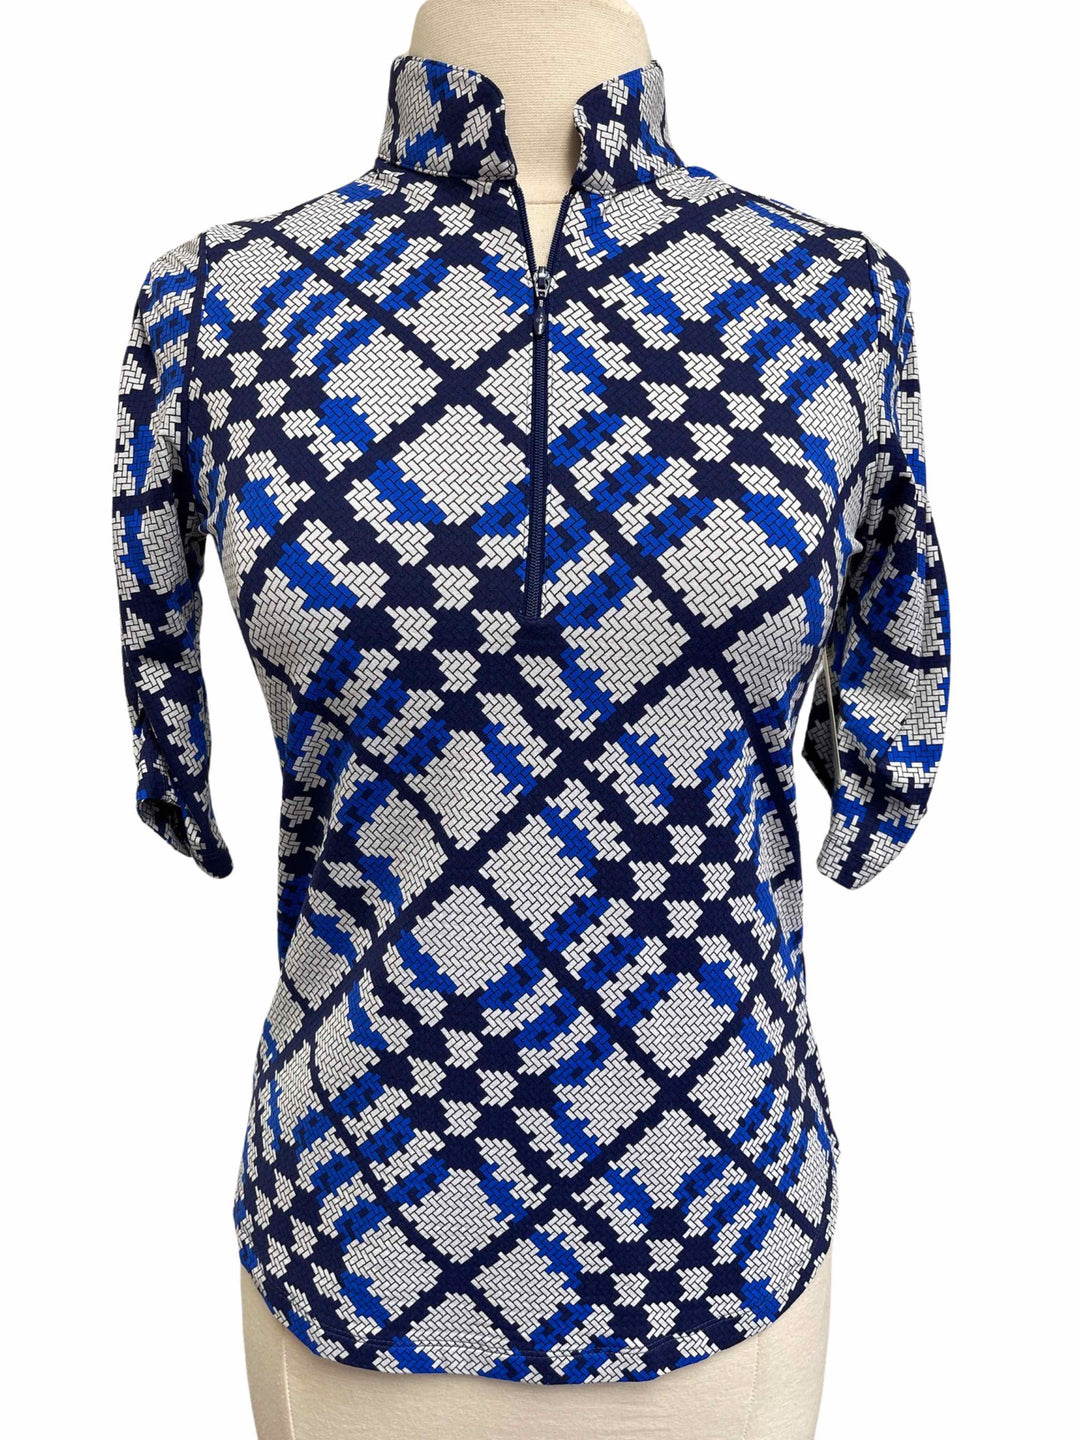 IBKUL Sonika Print Ruched Elbow Length Sleeve Top- Size Small - Skorzie